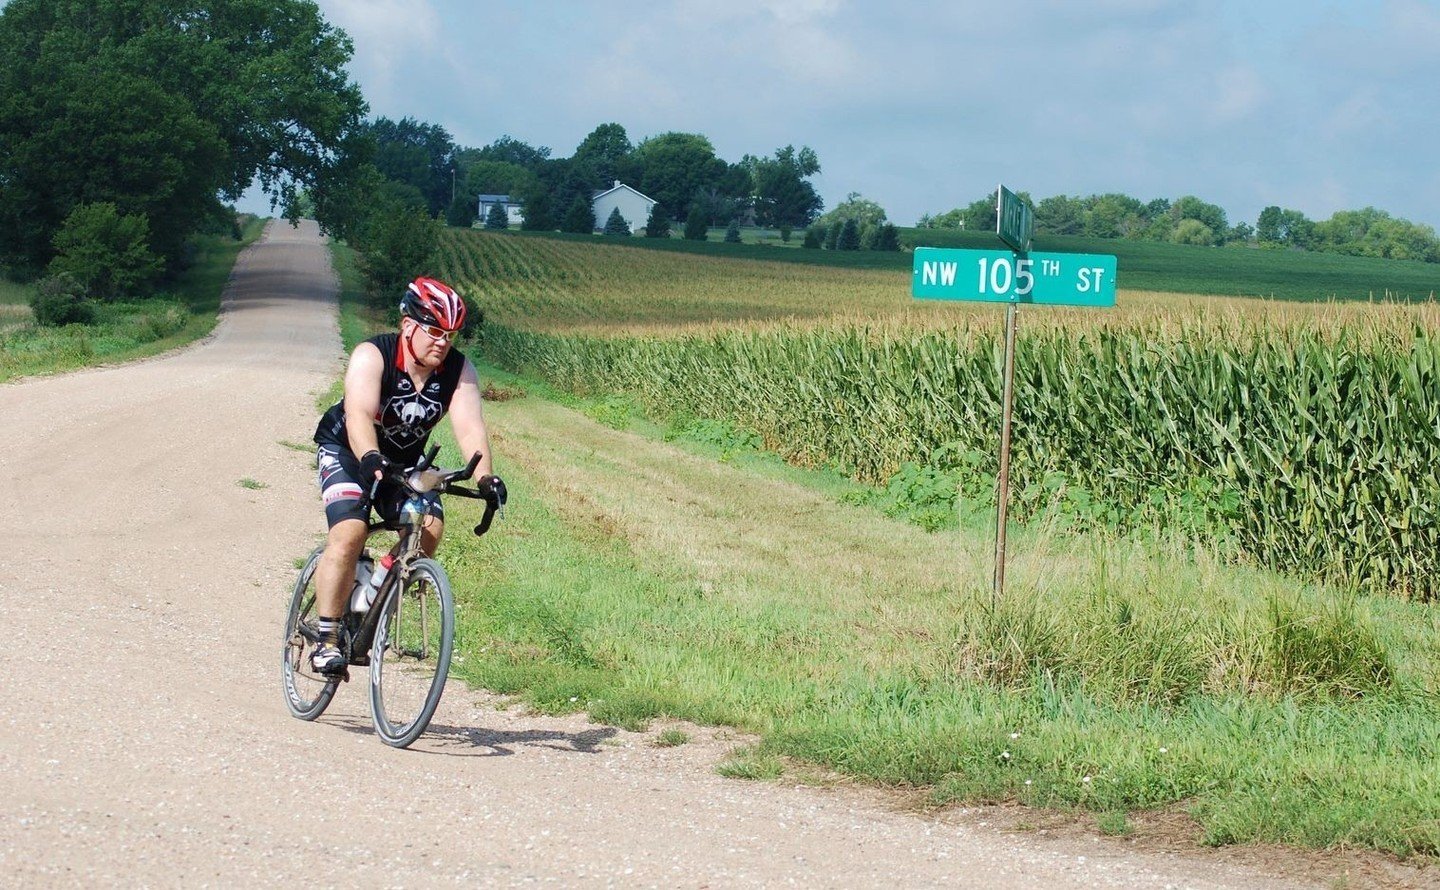 TBT: Gravel Worlds 2014! Who all was there?⁠
⁠
This would be our last year starting out by Conestoga Lake. ⁠
⁠
Join us for year 15! Reg open at www.gravel-worlds.com